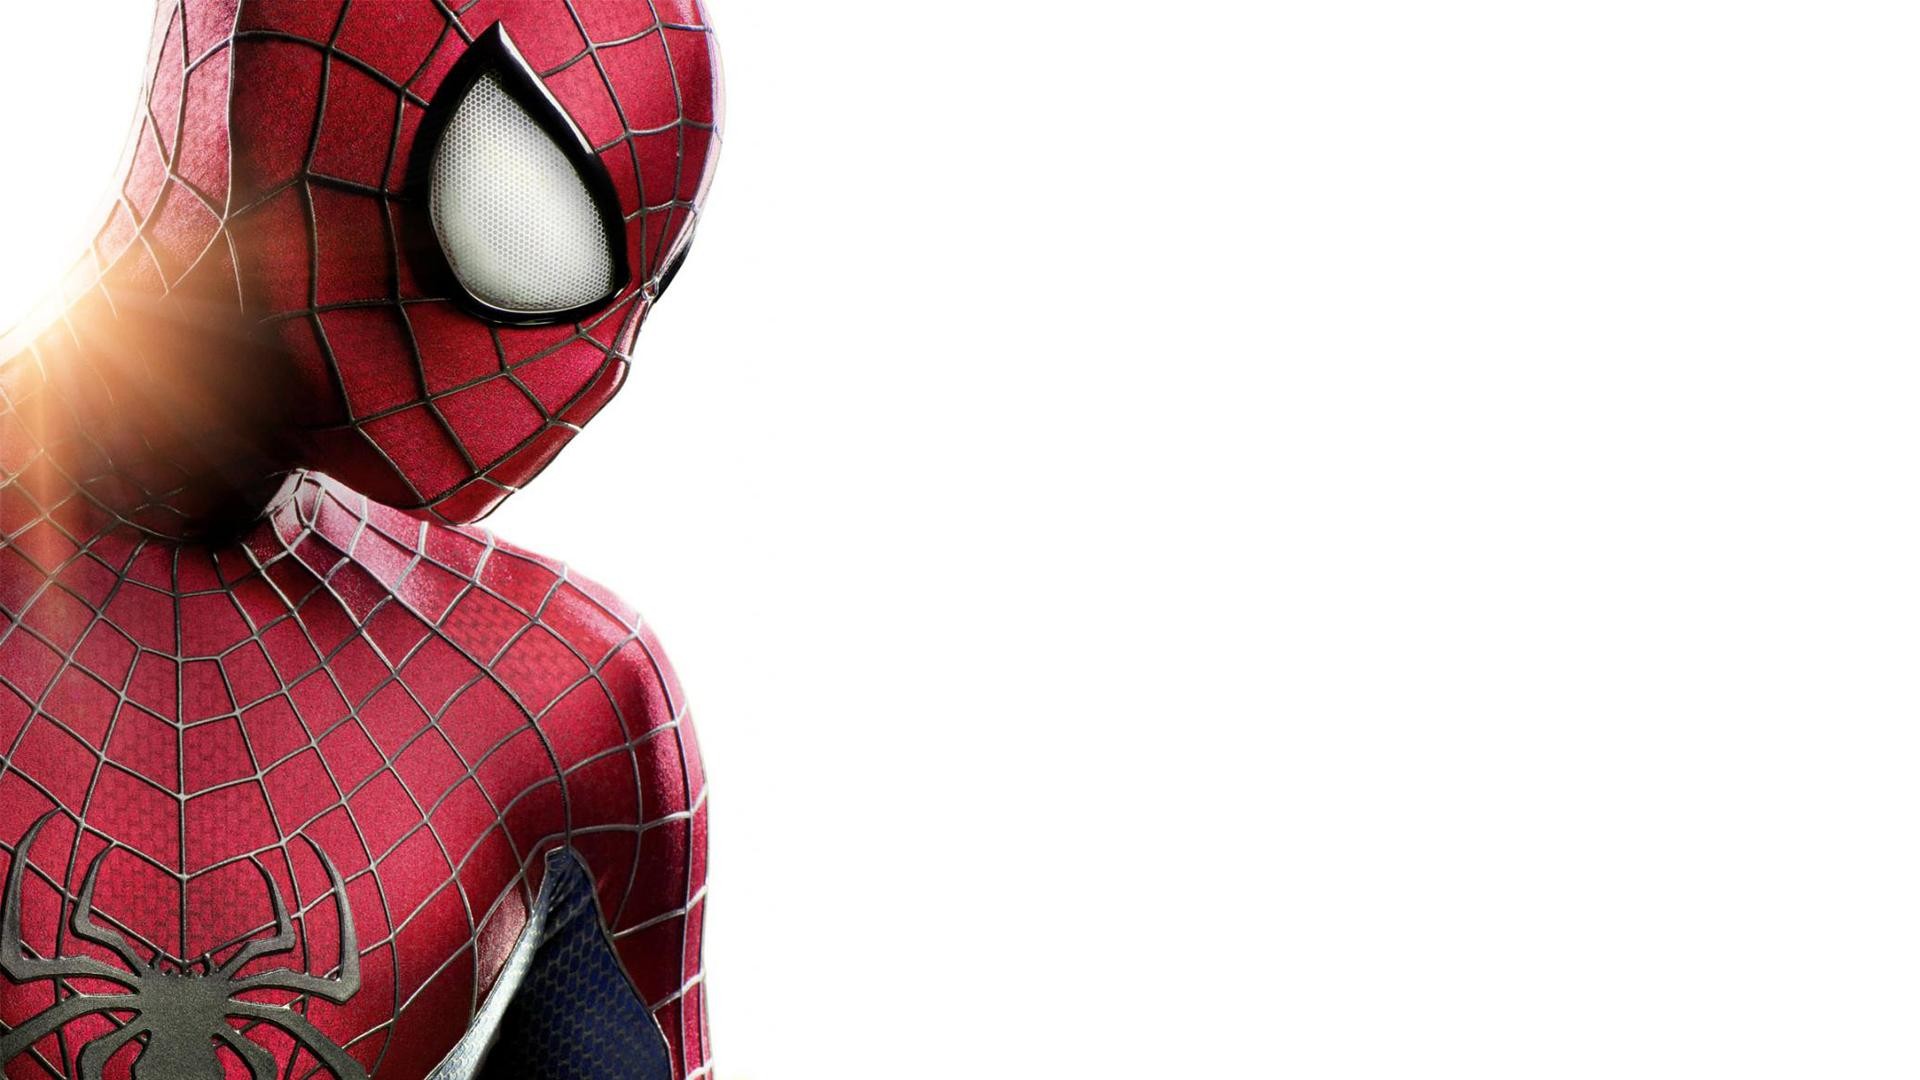 Movie The Amazing Spider-Man 2 HD Wallpaper | Background Image